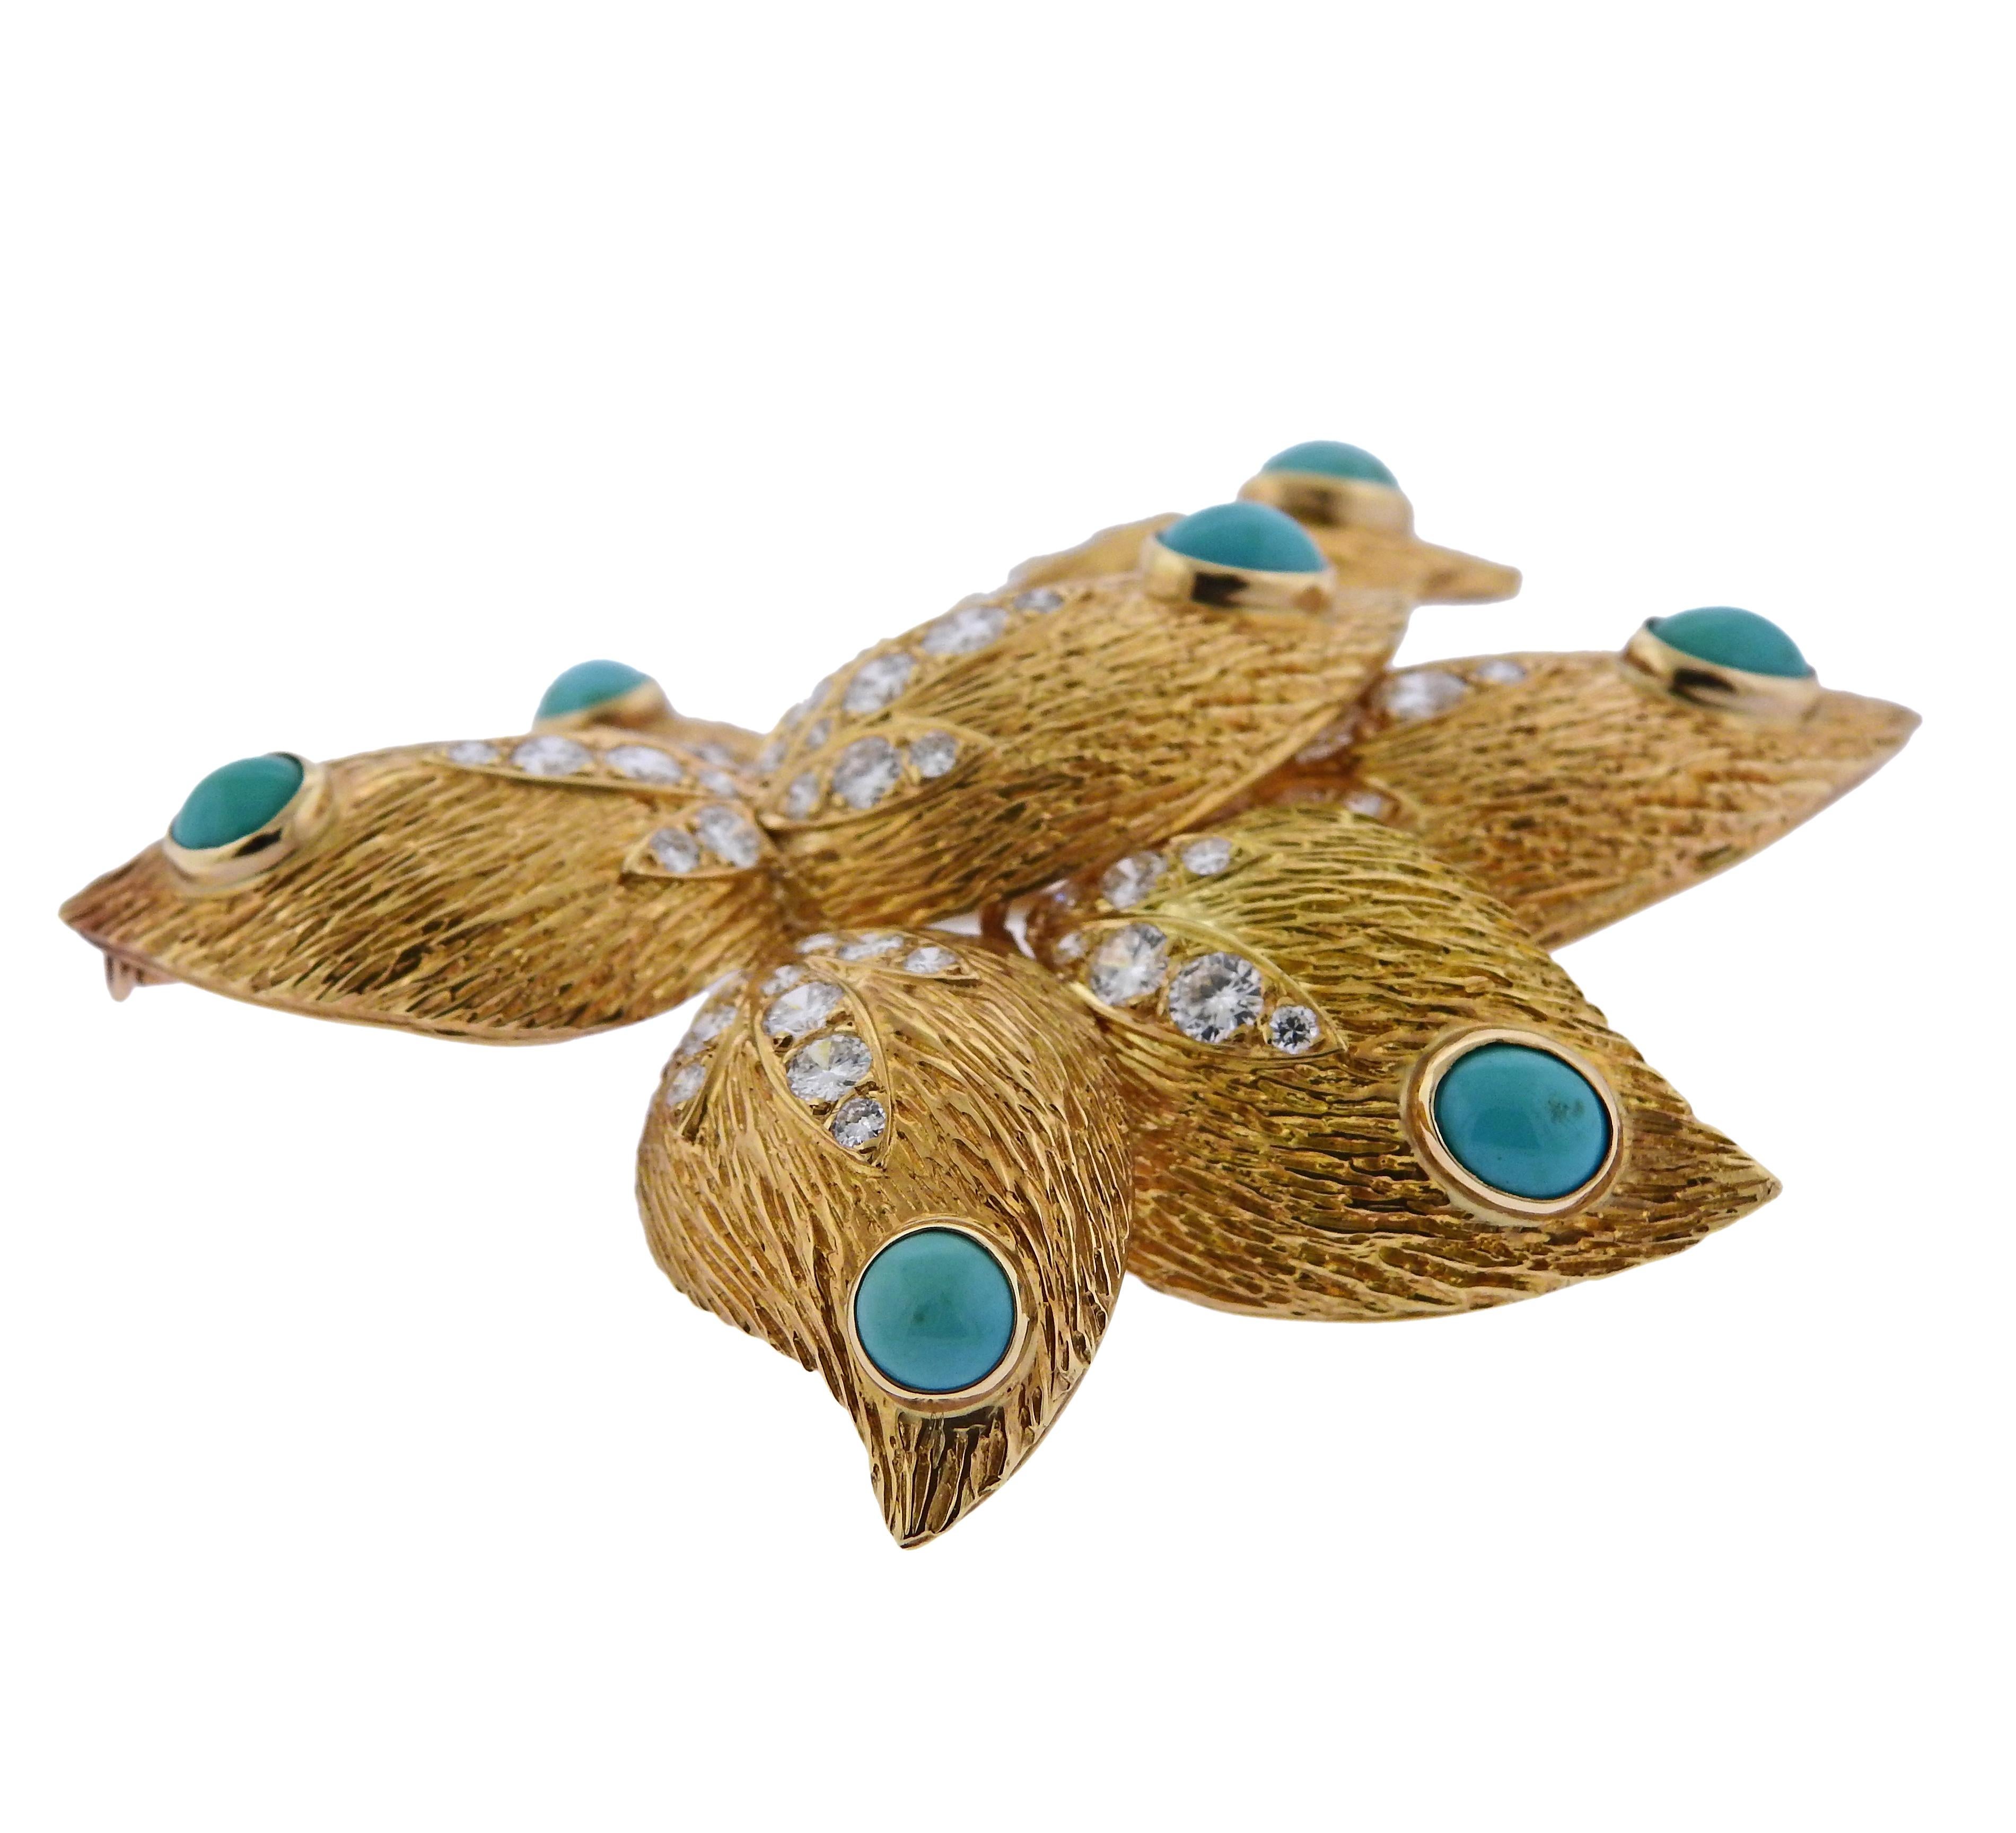 18k gold French brooch featuring diamond and turquoise. Brooch measures 60mmX 66mm and weighs 35.5 grams. Features approximately 2.20ctw of G/VS diamonds. Marked Made in France Depose ssm. 